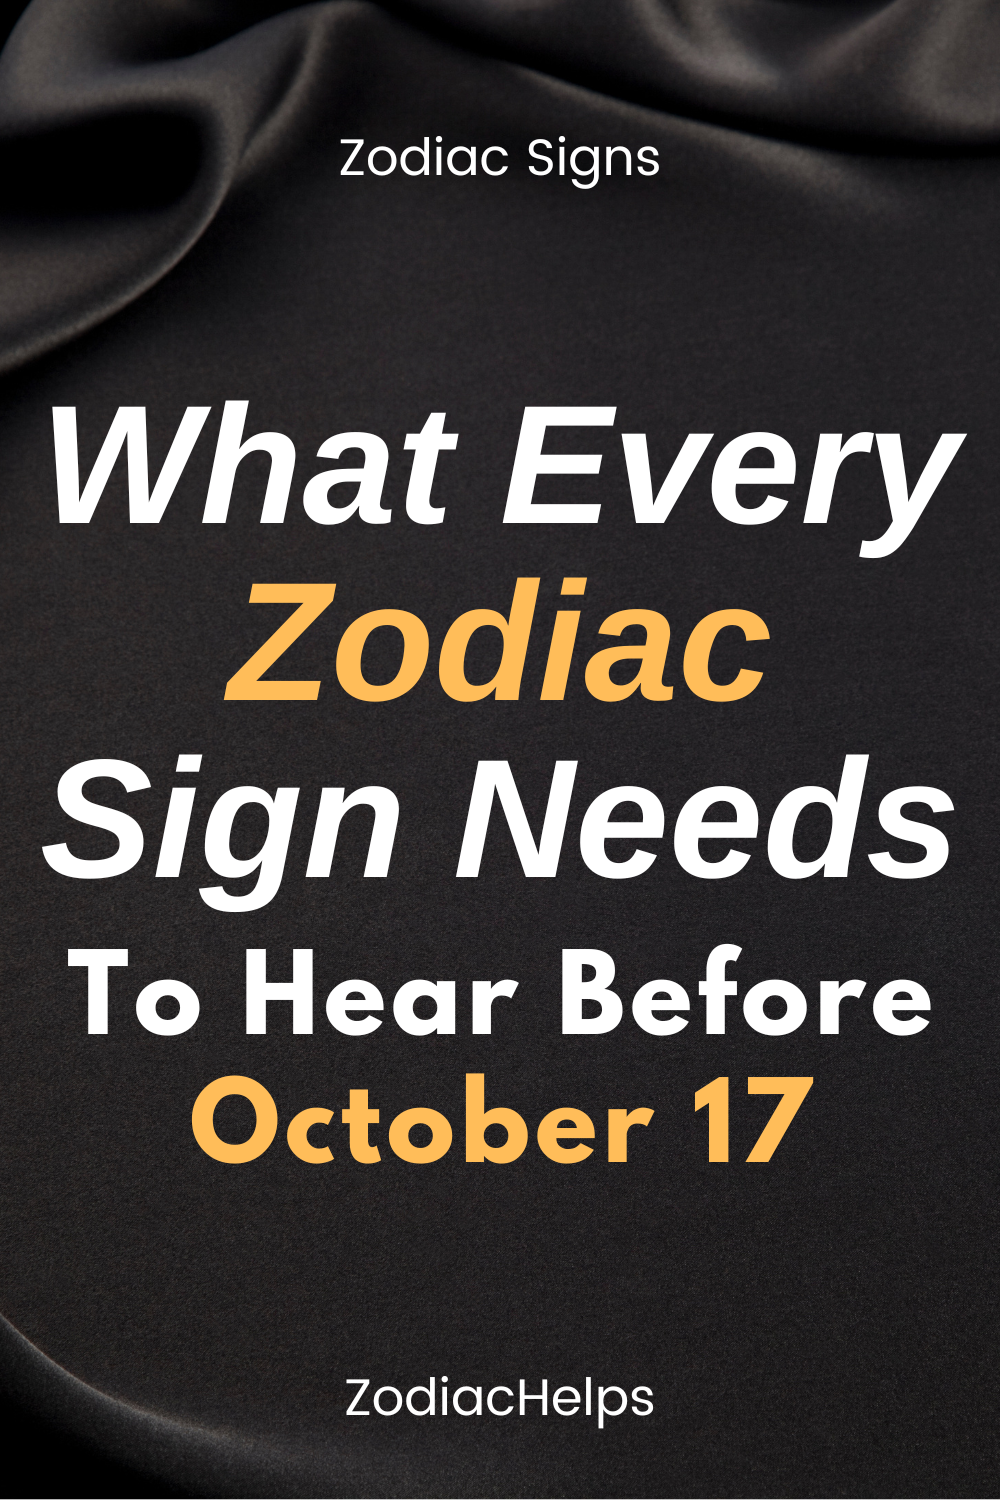 What Every Zodiac Sign Needs To Hear Before October 17